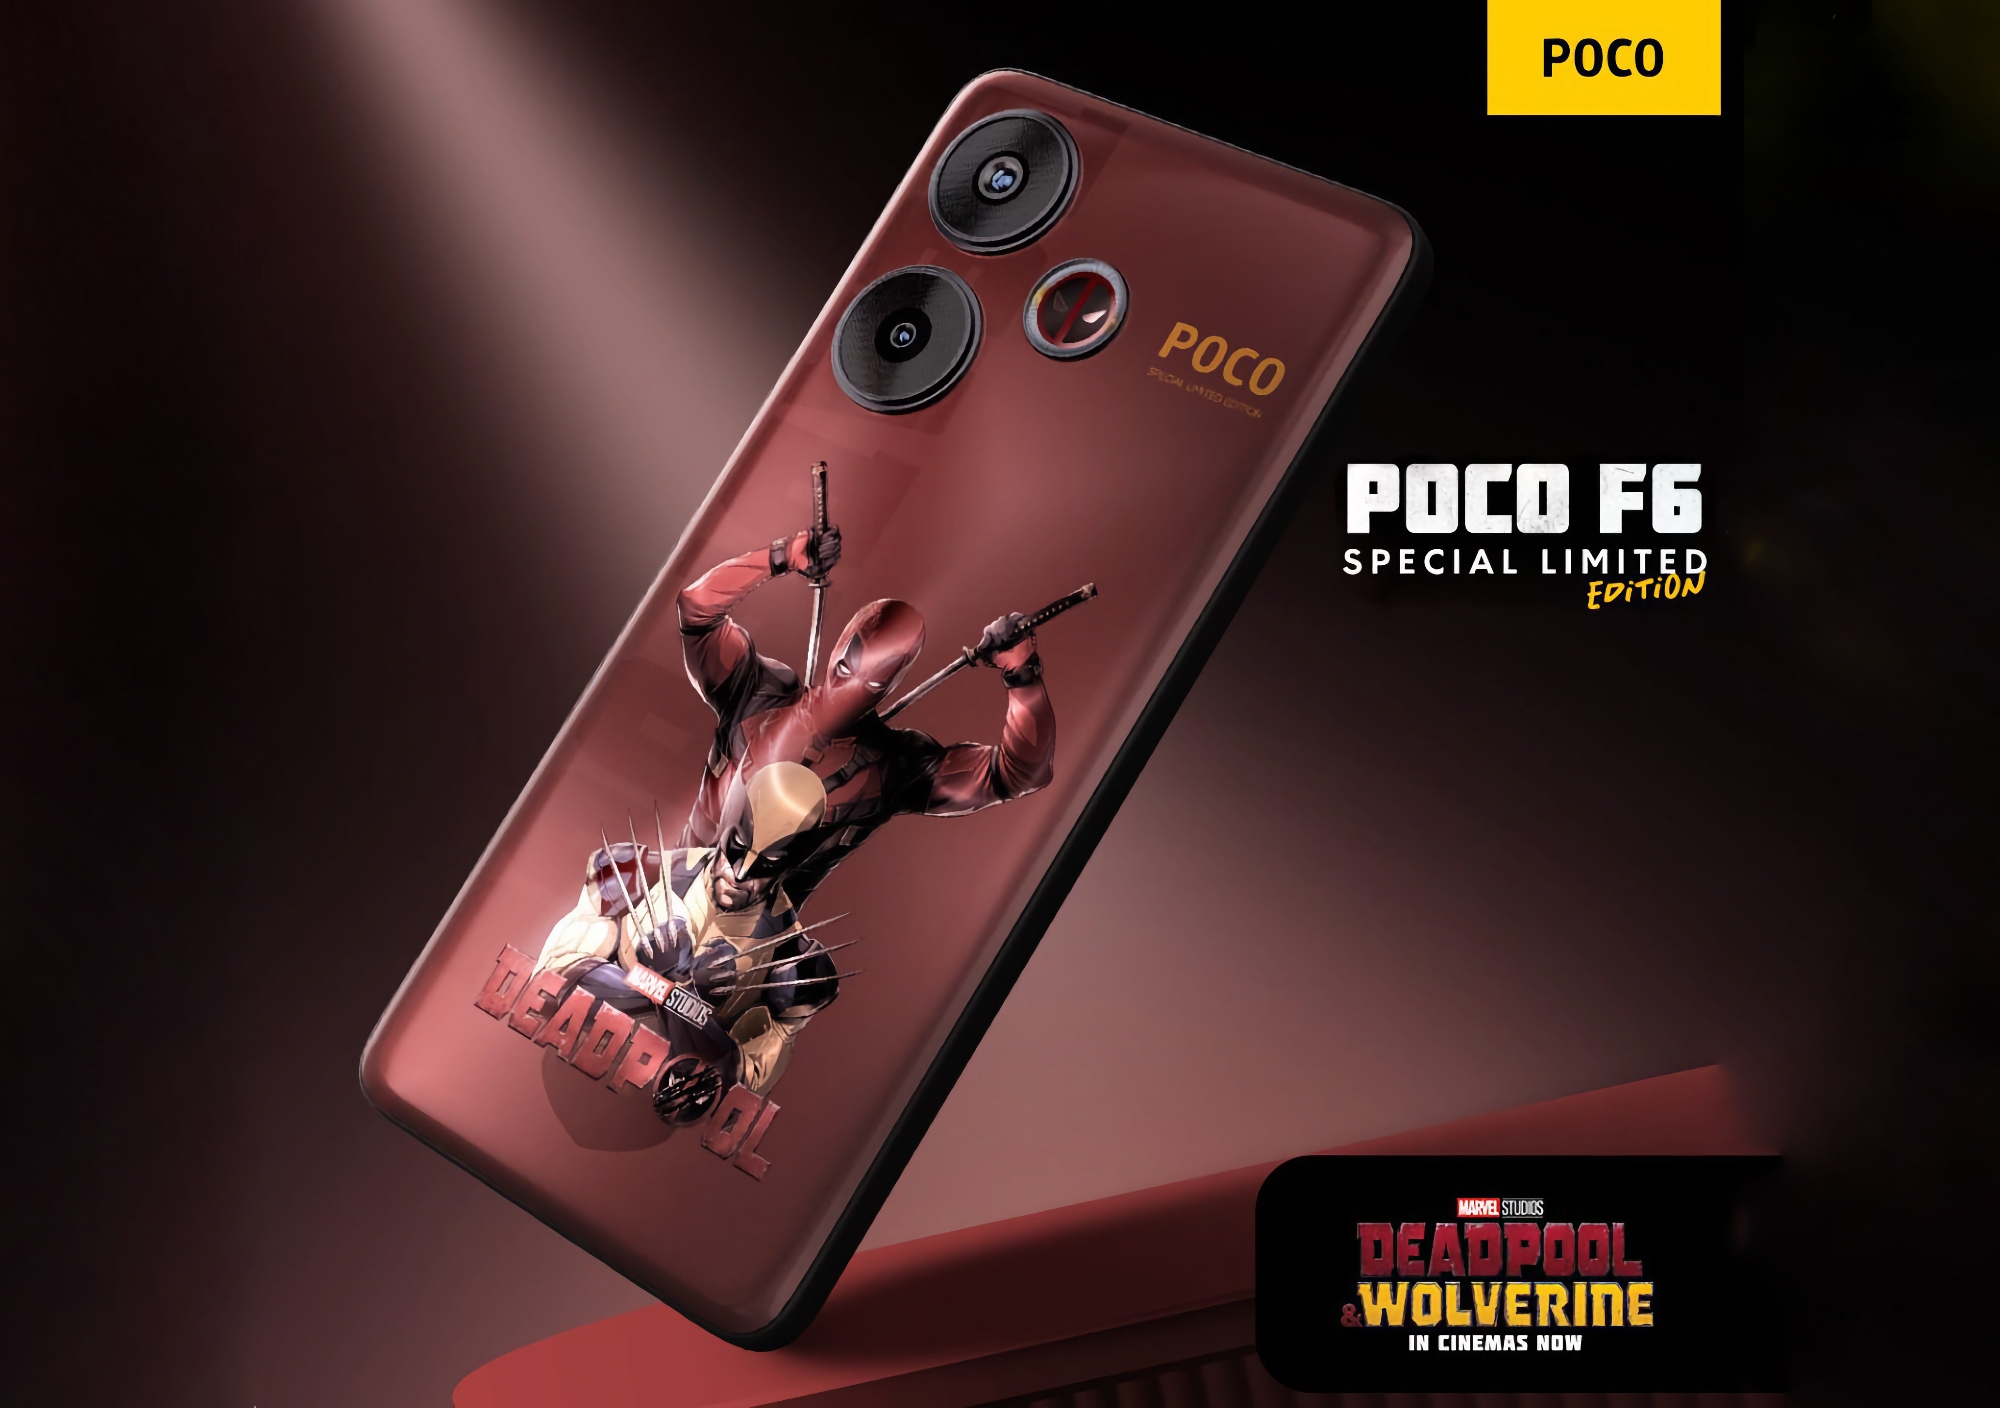 For fans of Deadpool and Wolverine: Xiaomi has unveiled the POCO F6 Deadpool Limited Edition